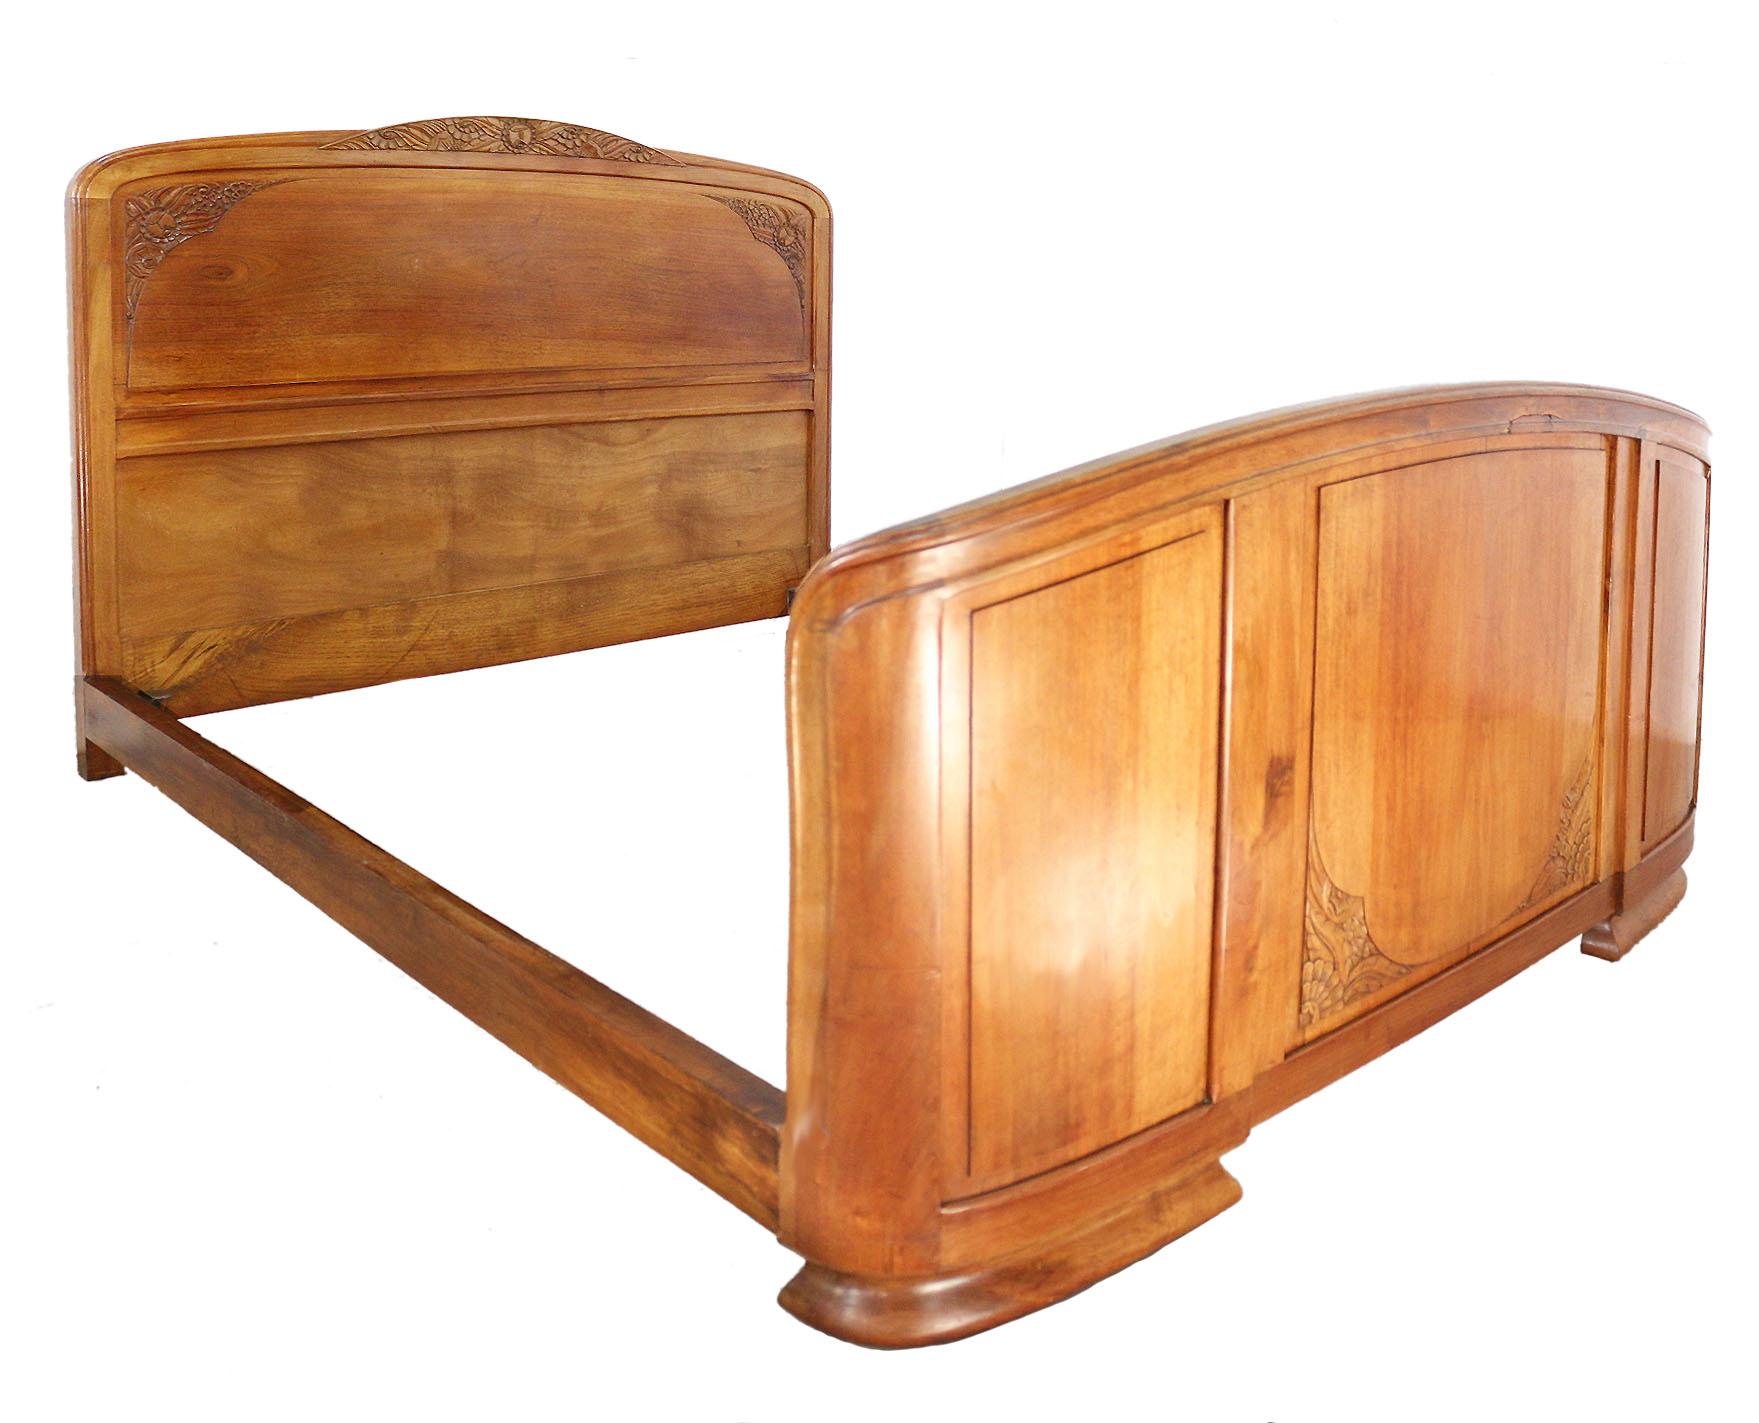 French Art Deco bed US Queen size UK King size
Solid carved walnut
French provincial
Foot board height 81cms
This will take a standard US Queen size or UK King size mattress on either a slatted wood base or Bunkie or box base
Good vintage